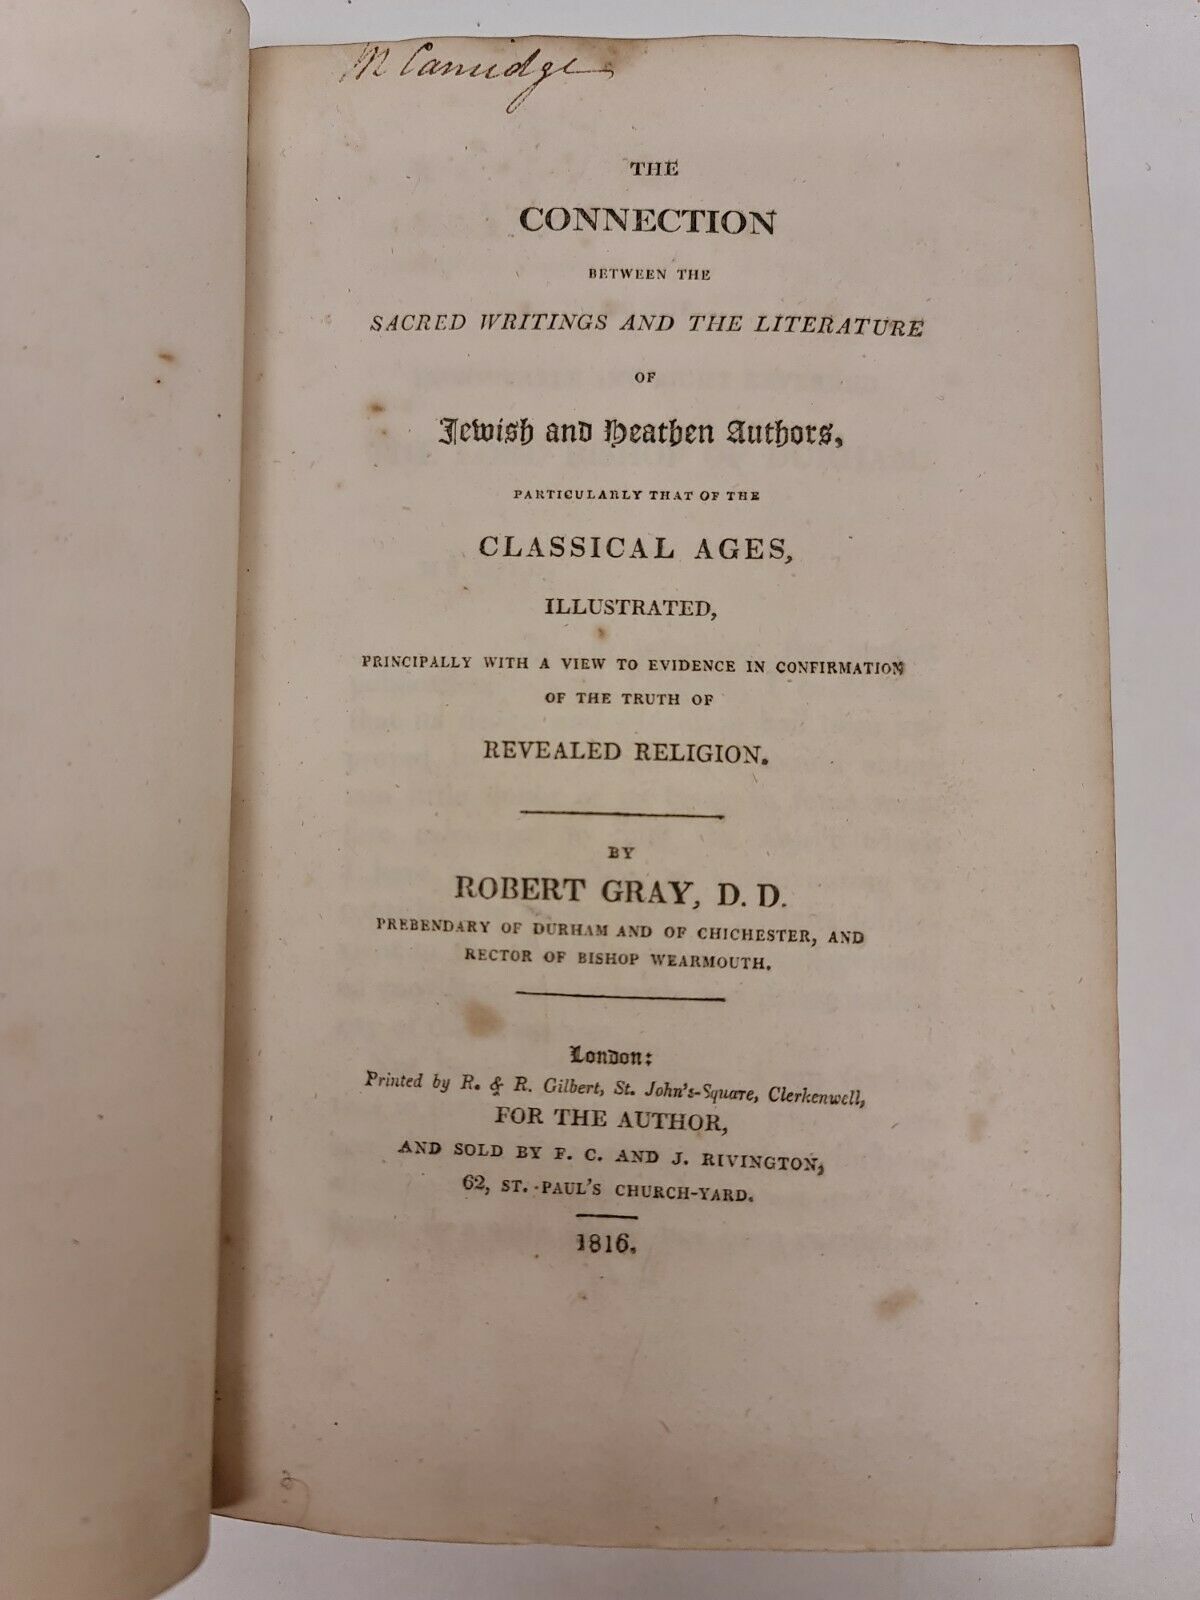 The Connection Between the Sacred Writings of the Literature and Jewish and Heathen authors (1816)